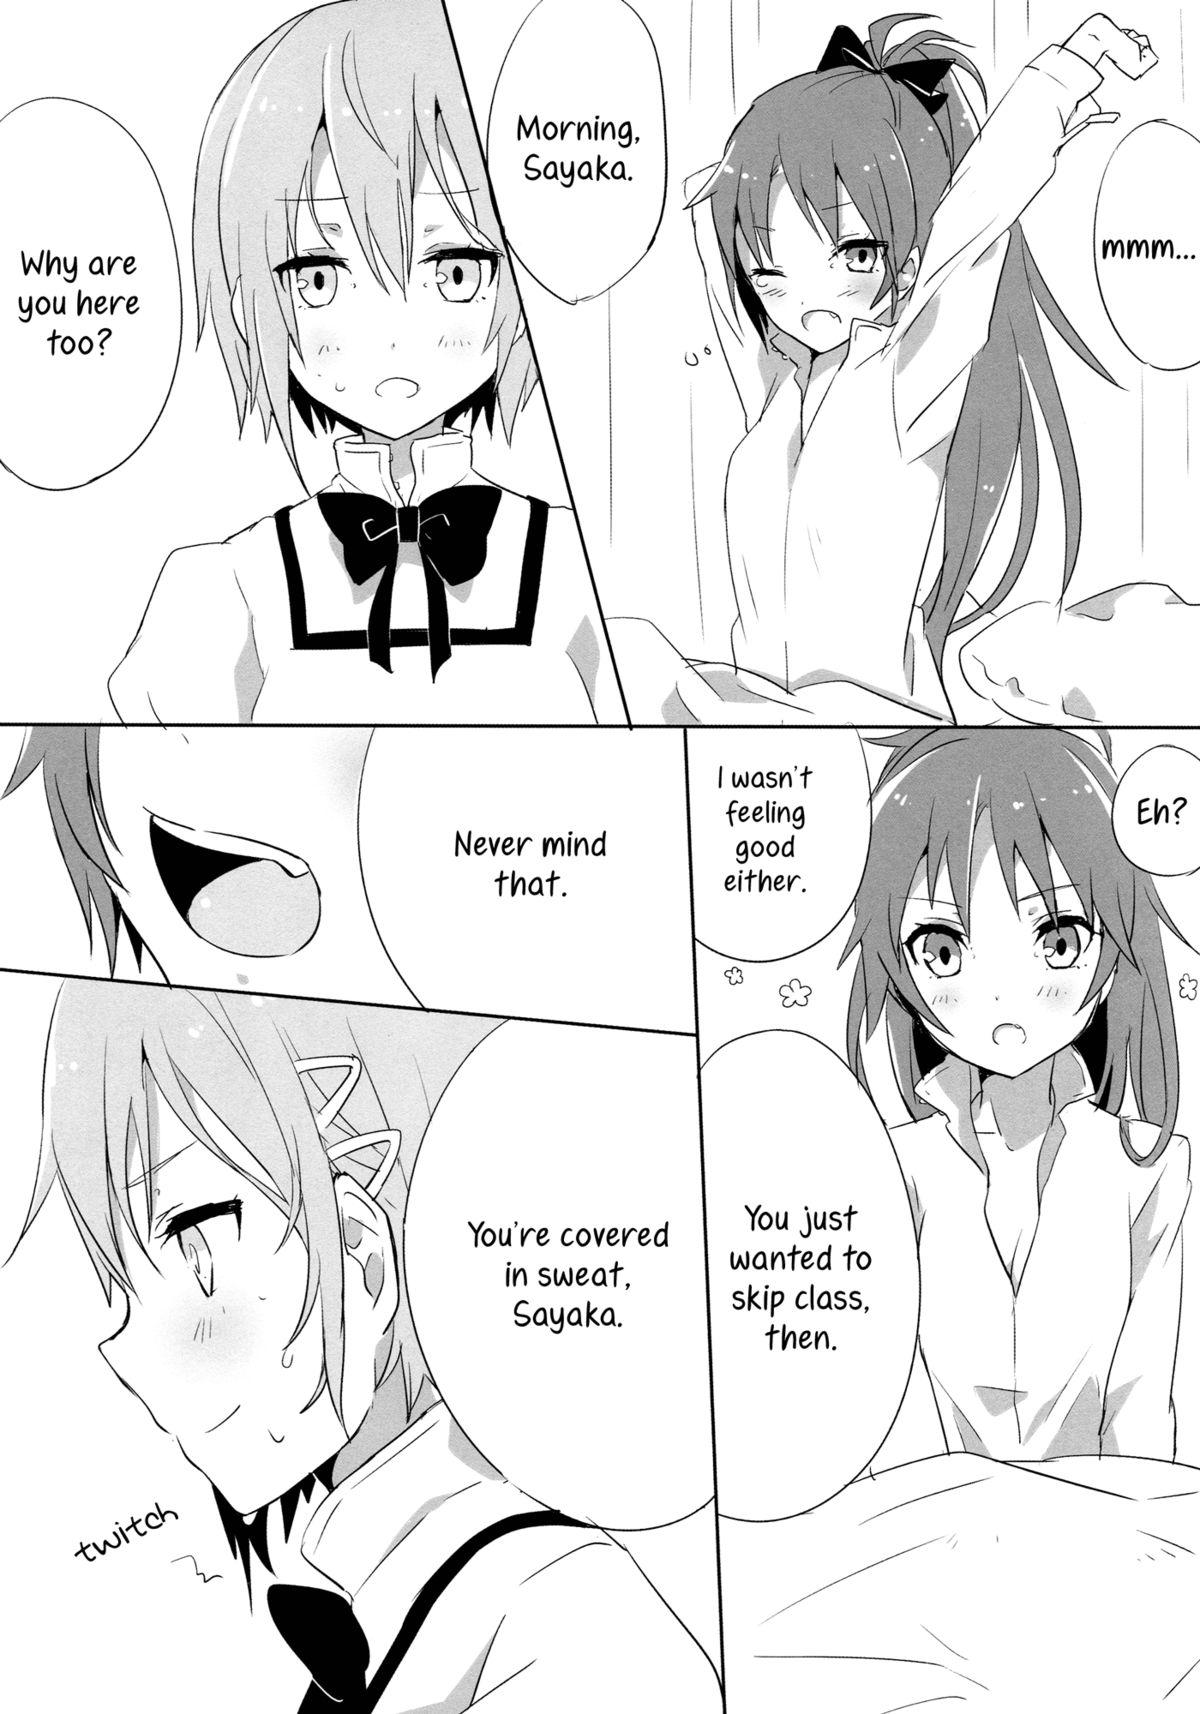 Pay How is condition? - Puella magi madoka magica Gay College - Page 6